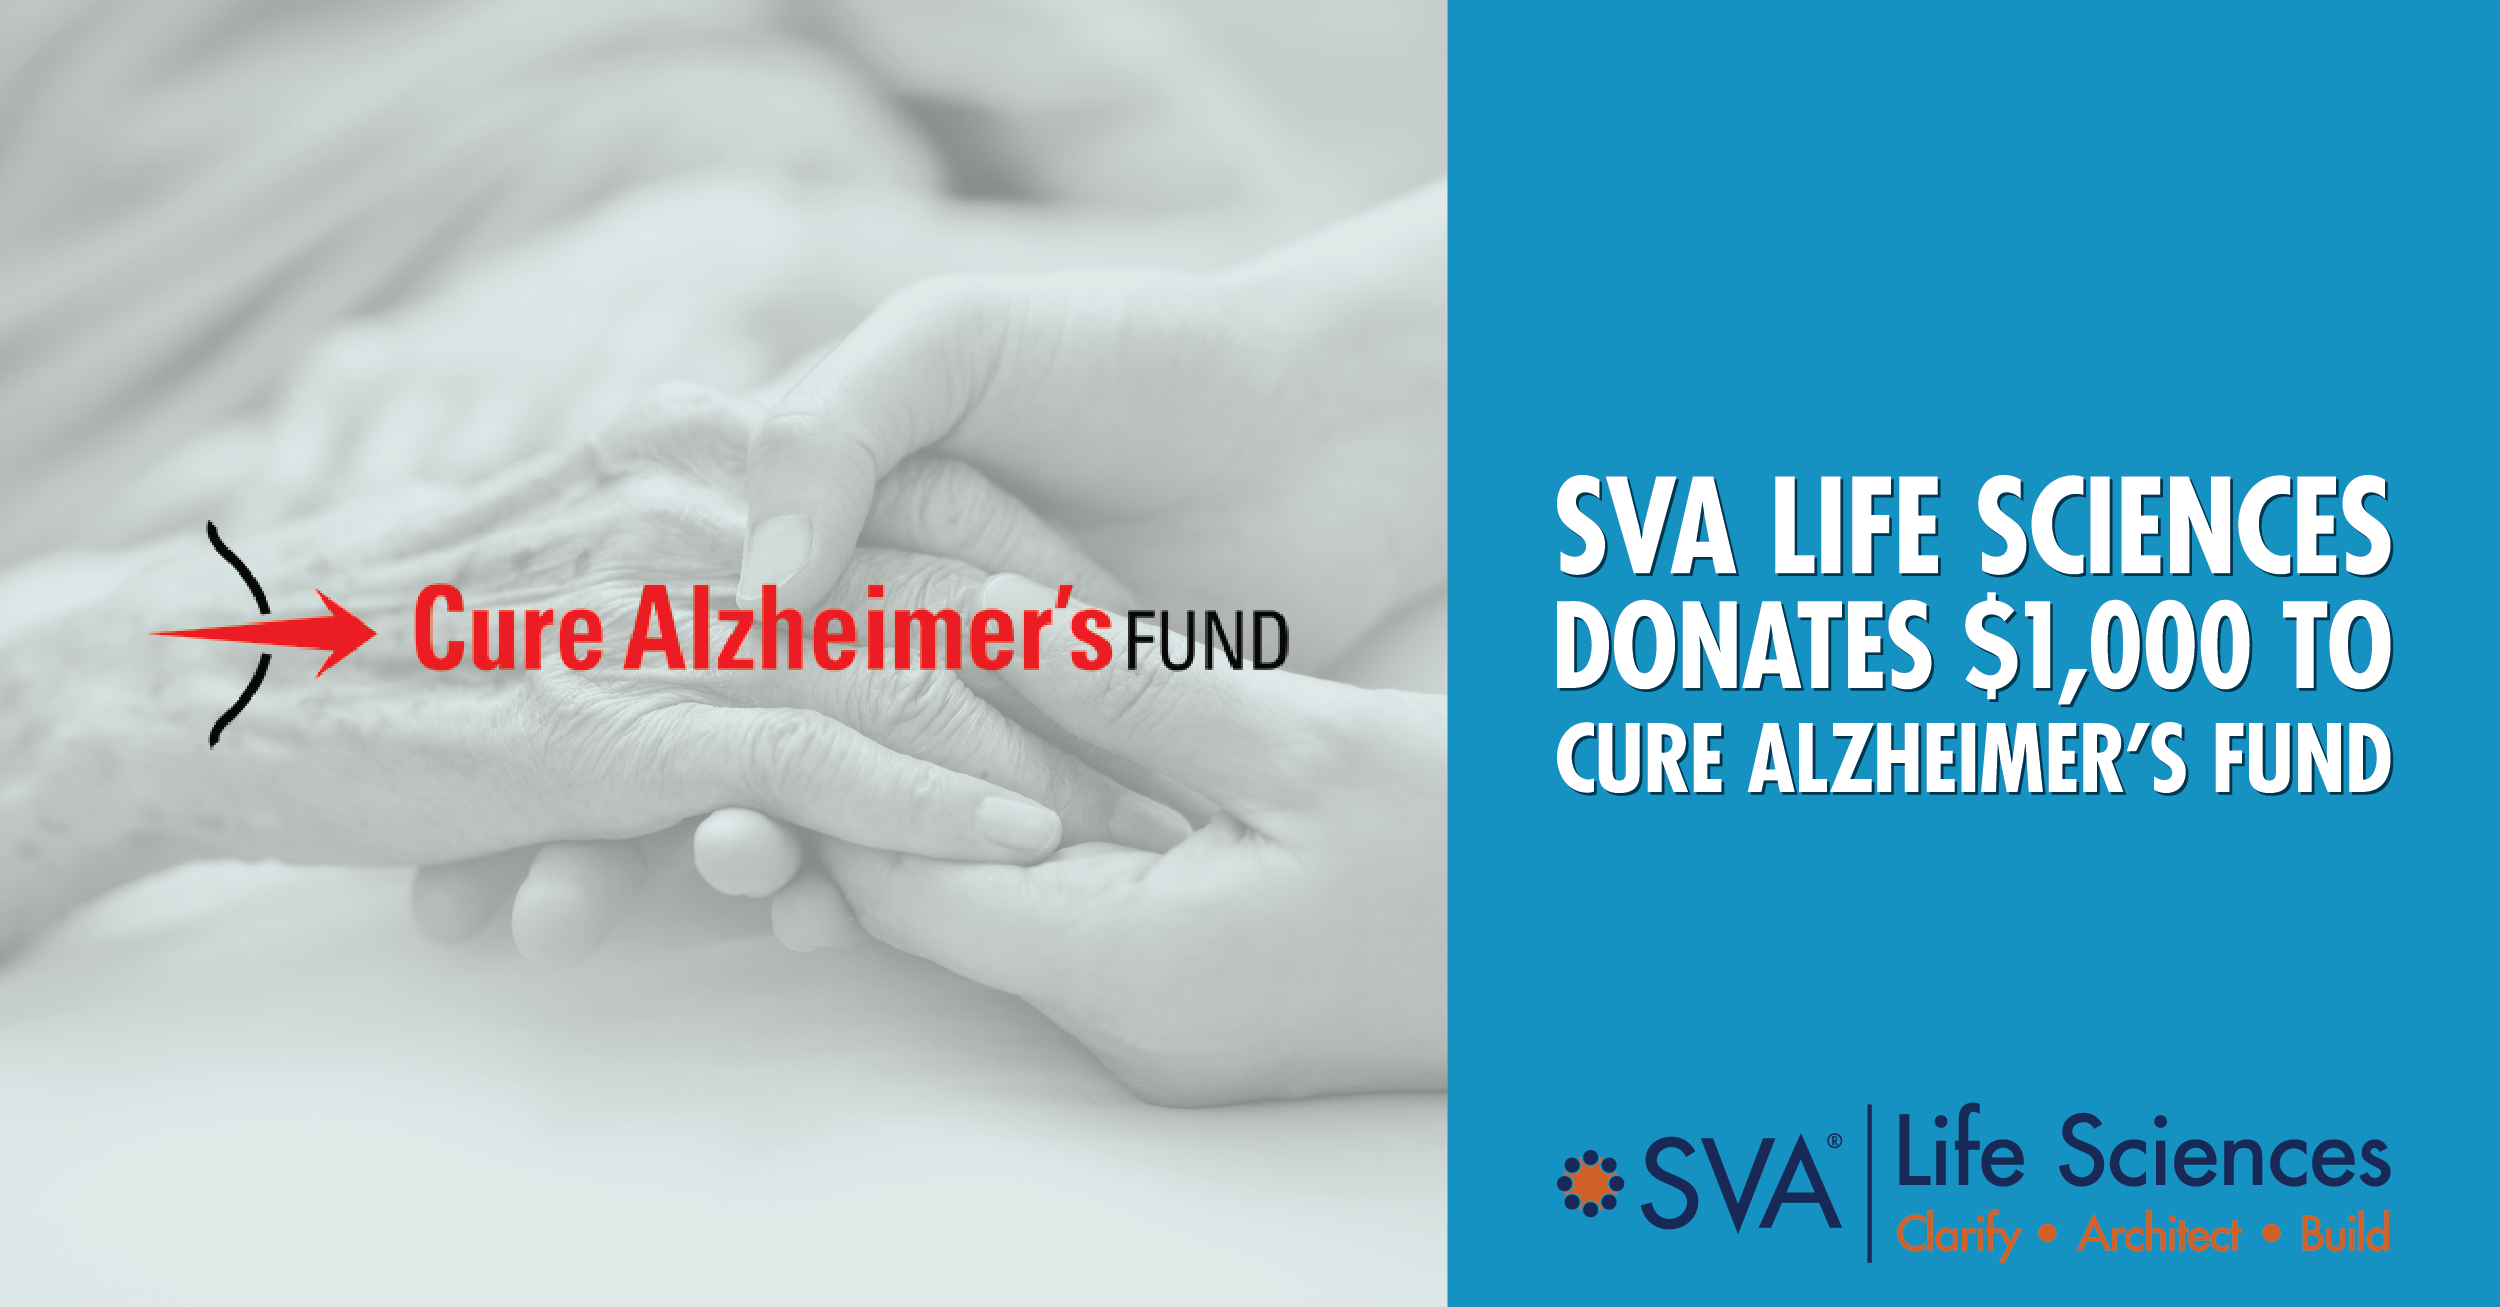 SVA Life Sciences Donates $1,000 to Cure Alzheimer’s Fund